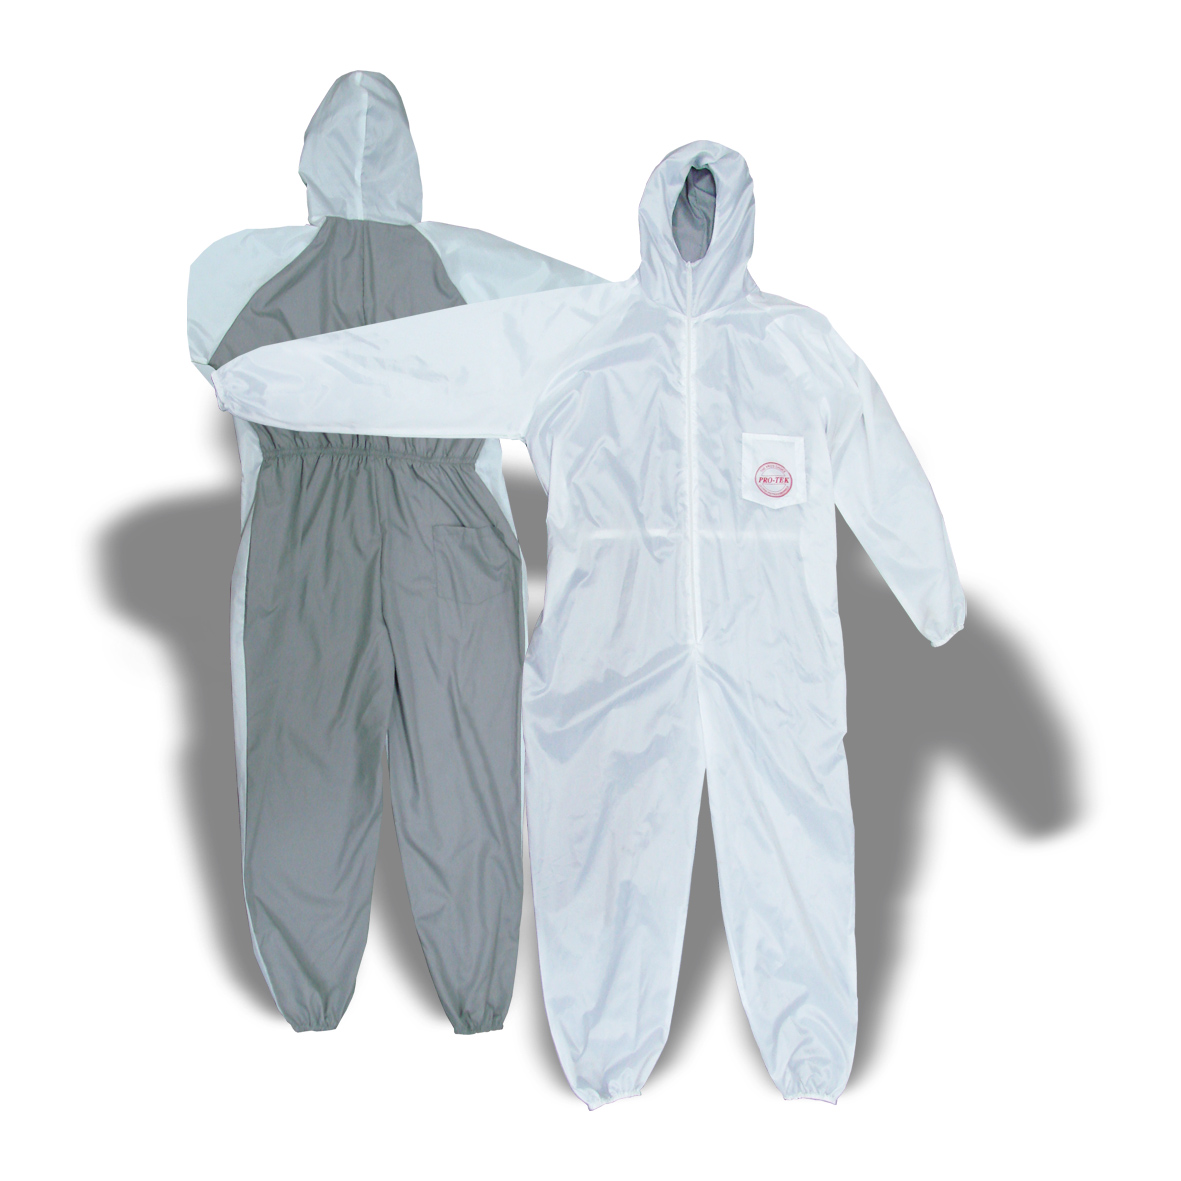 The Pro-Tek 9402 is made from breathable, machine washable nylon, slalon and therma blend